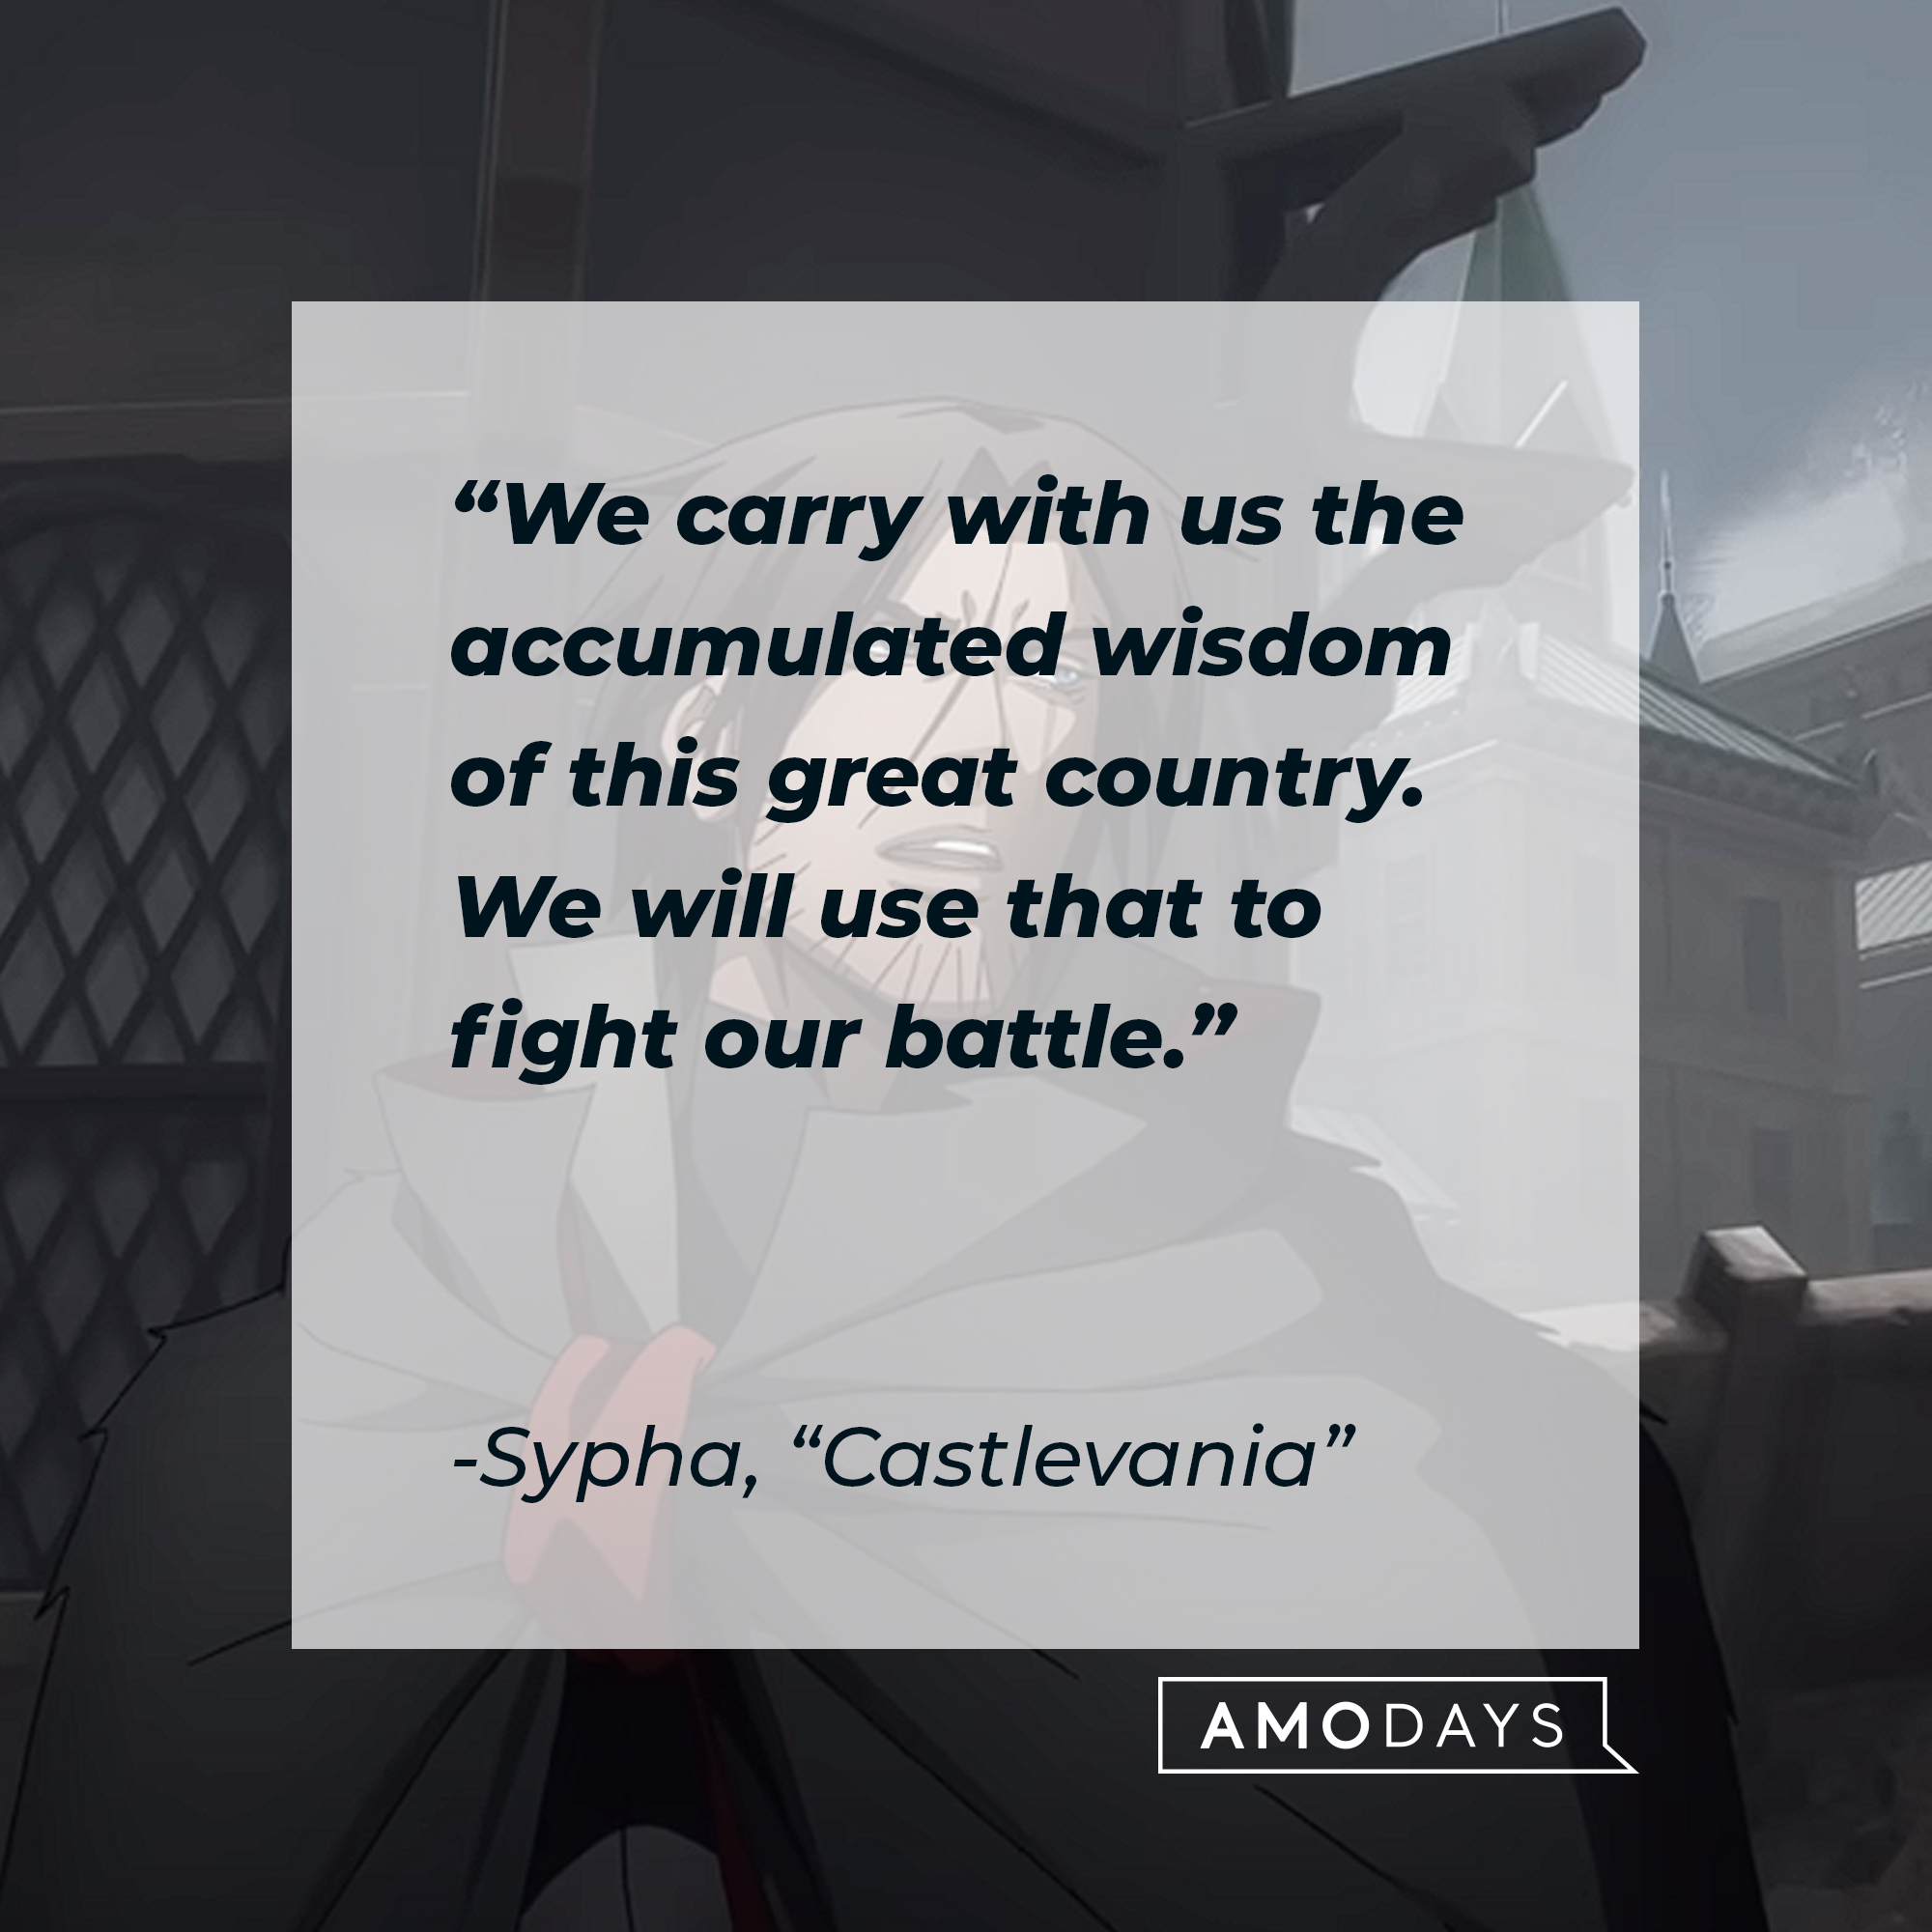 Sypha's quote from "Castlevania:" “We carry with us the accumulated wisdom of this great country. We will use that to fight our battle.” | Source: Youtube.com/Netflix